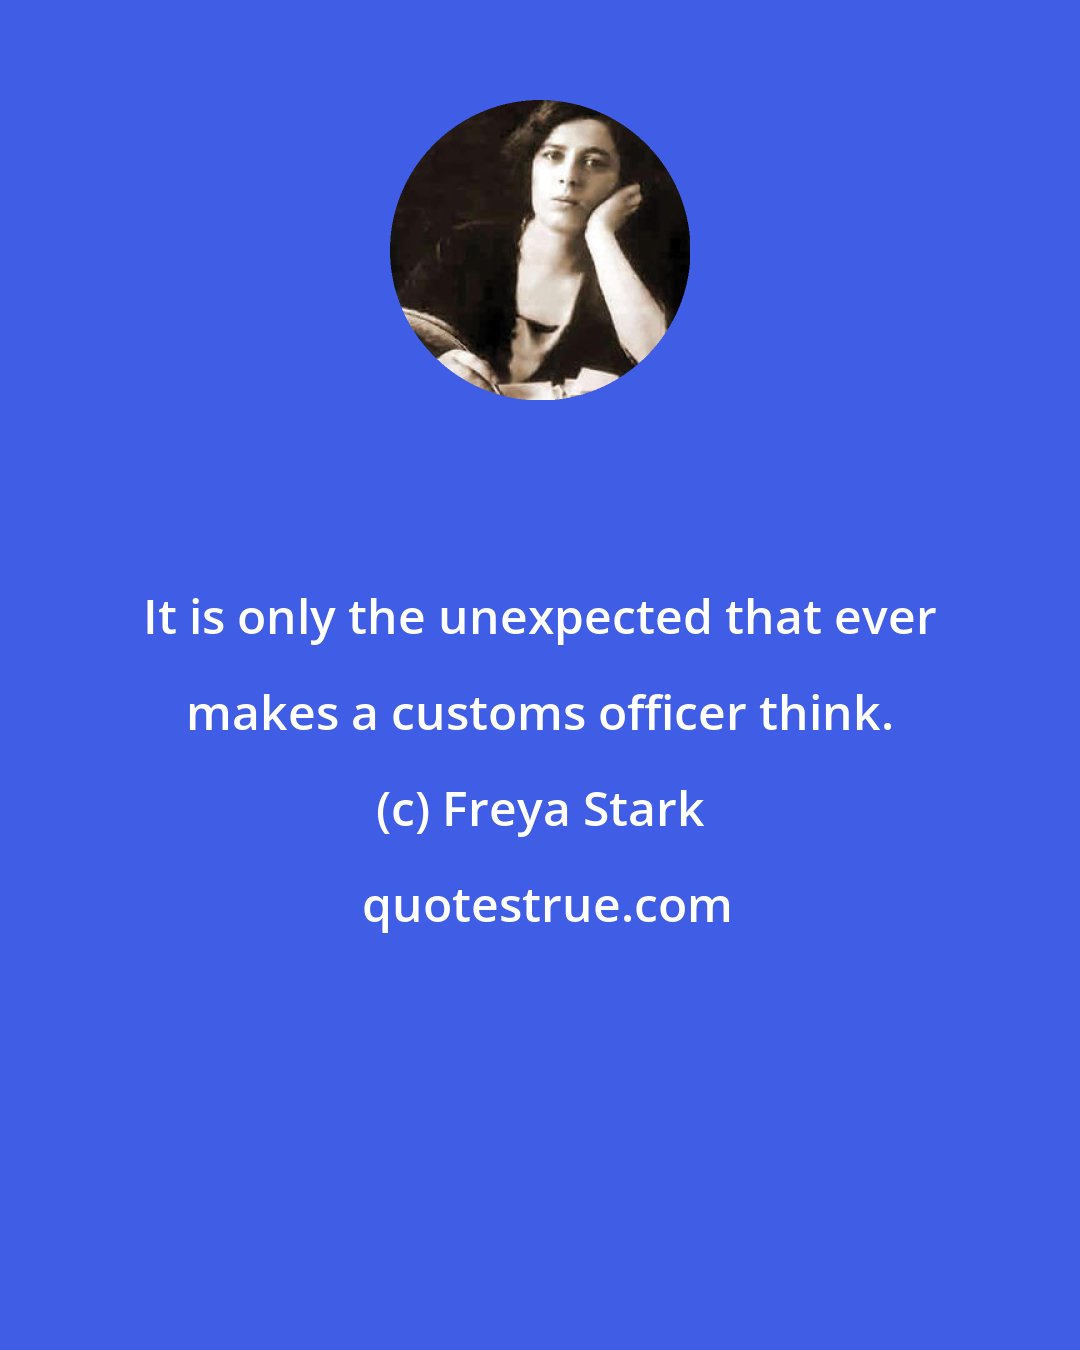 Freya Stark: It is only the unexpected that ever makes a customs officer think.